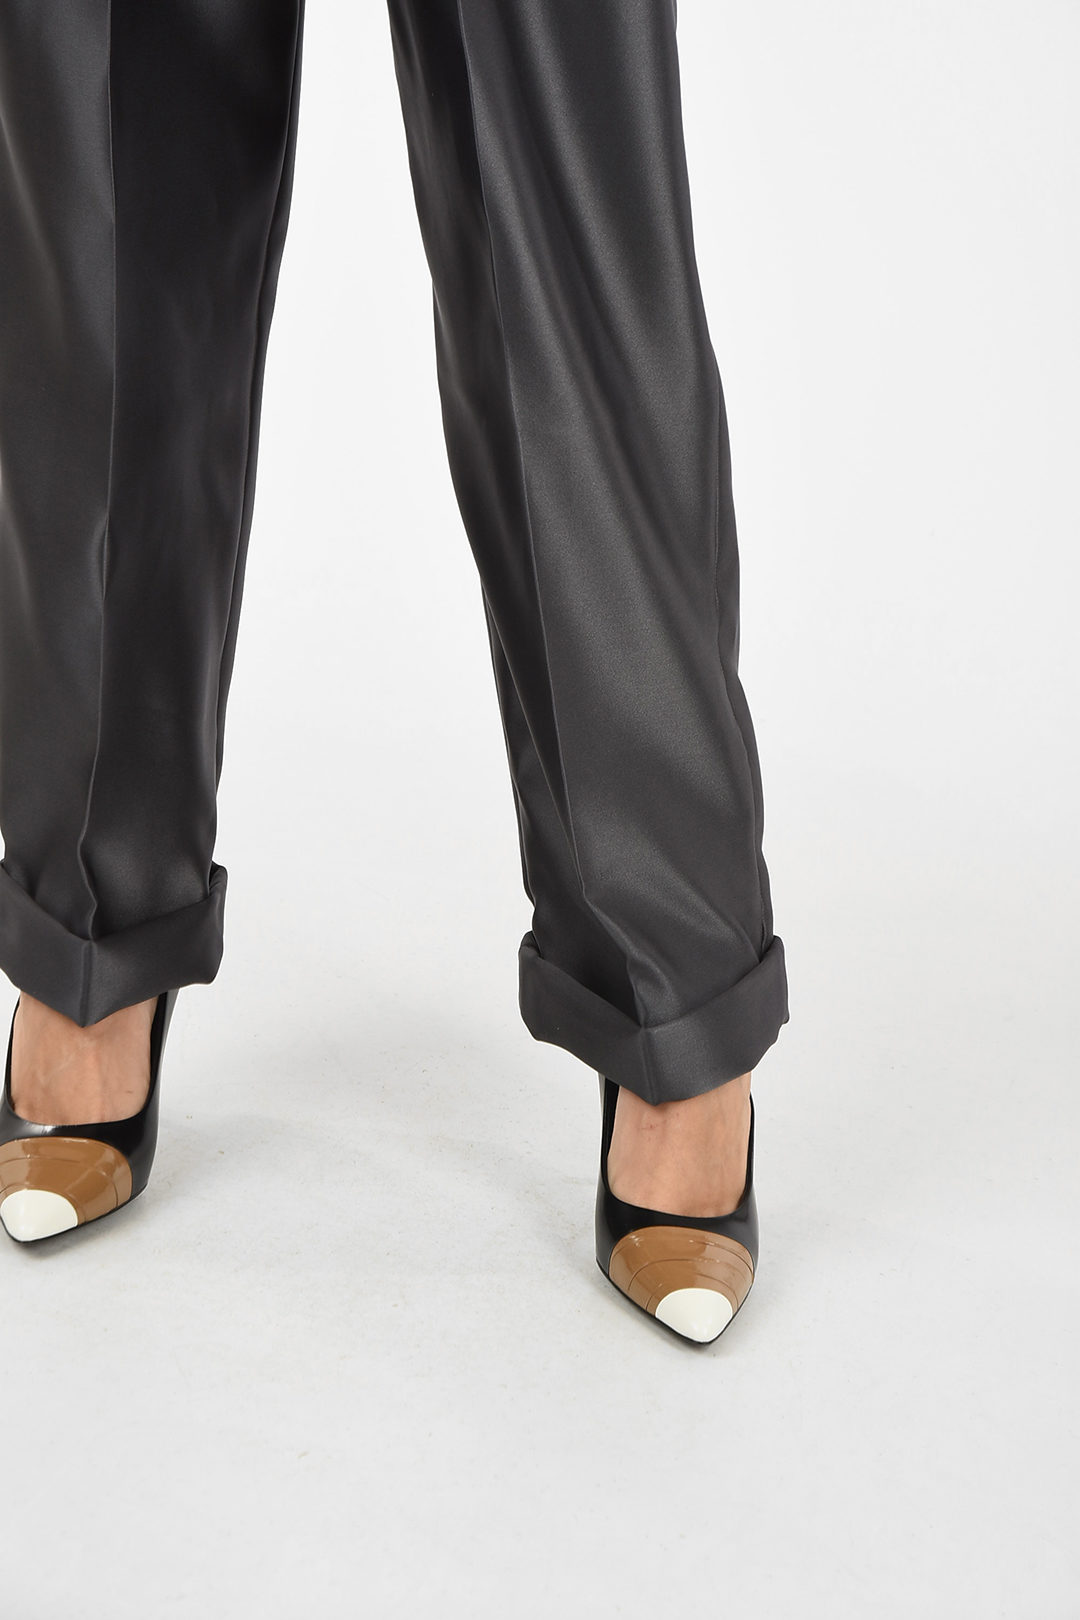 Tom Ford silk palazzo pants women - Glamood Outlet